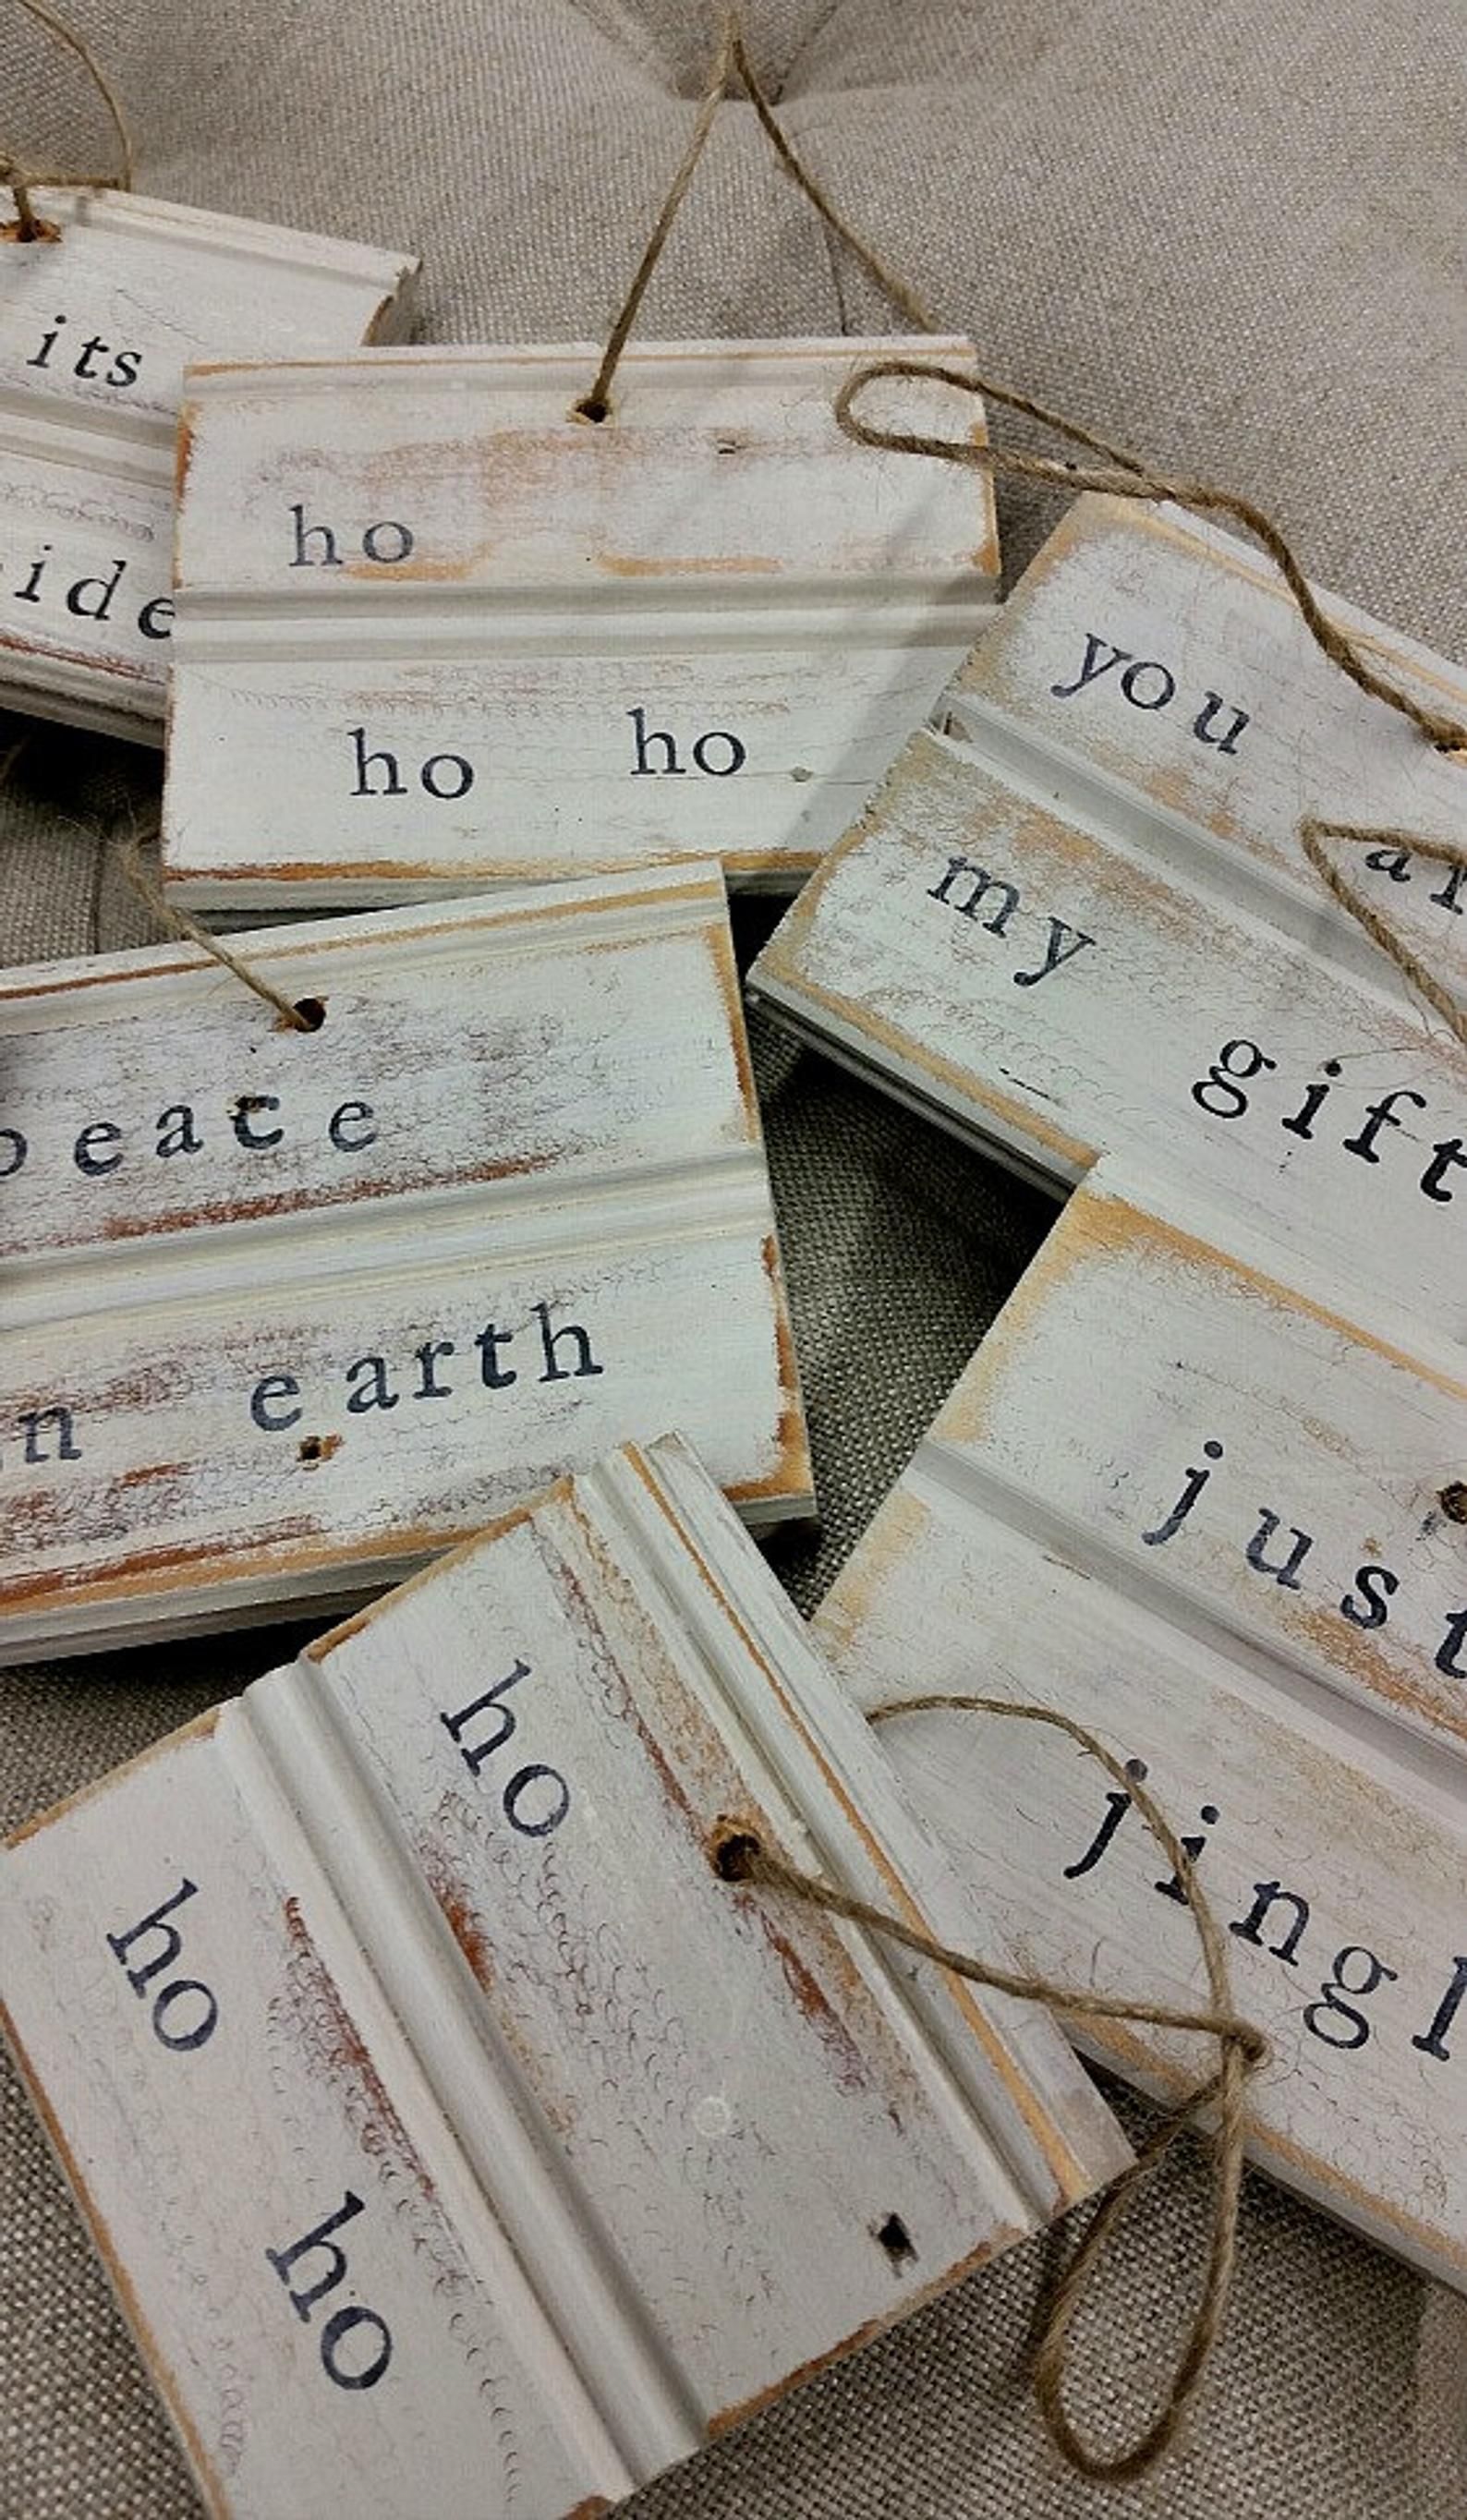 Reclaimed Wood Beadboard Christmas Ornaments Or Gift Tags - Hand Stamped with saying - Reclaimed Wood Beadboard Christmas Ornaments Or Gift Tags - Hand Stamped with saying -   18 diy Christmas ornaments ideas